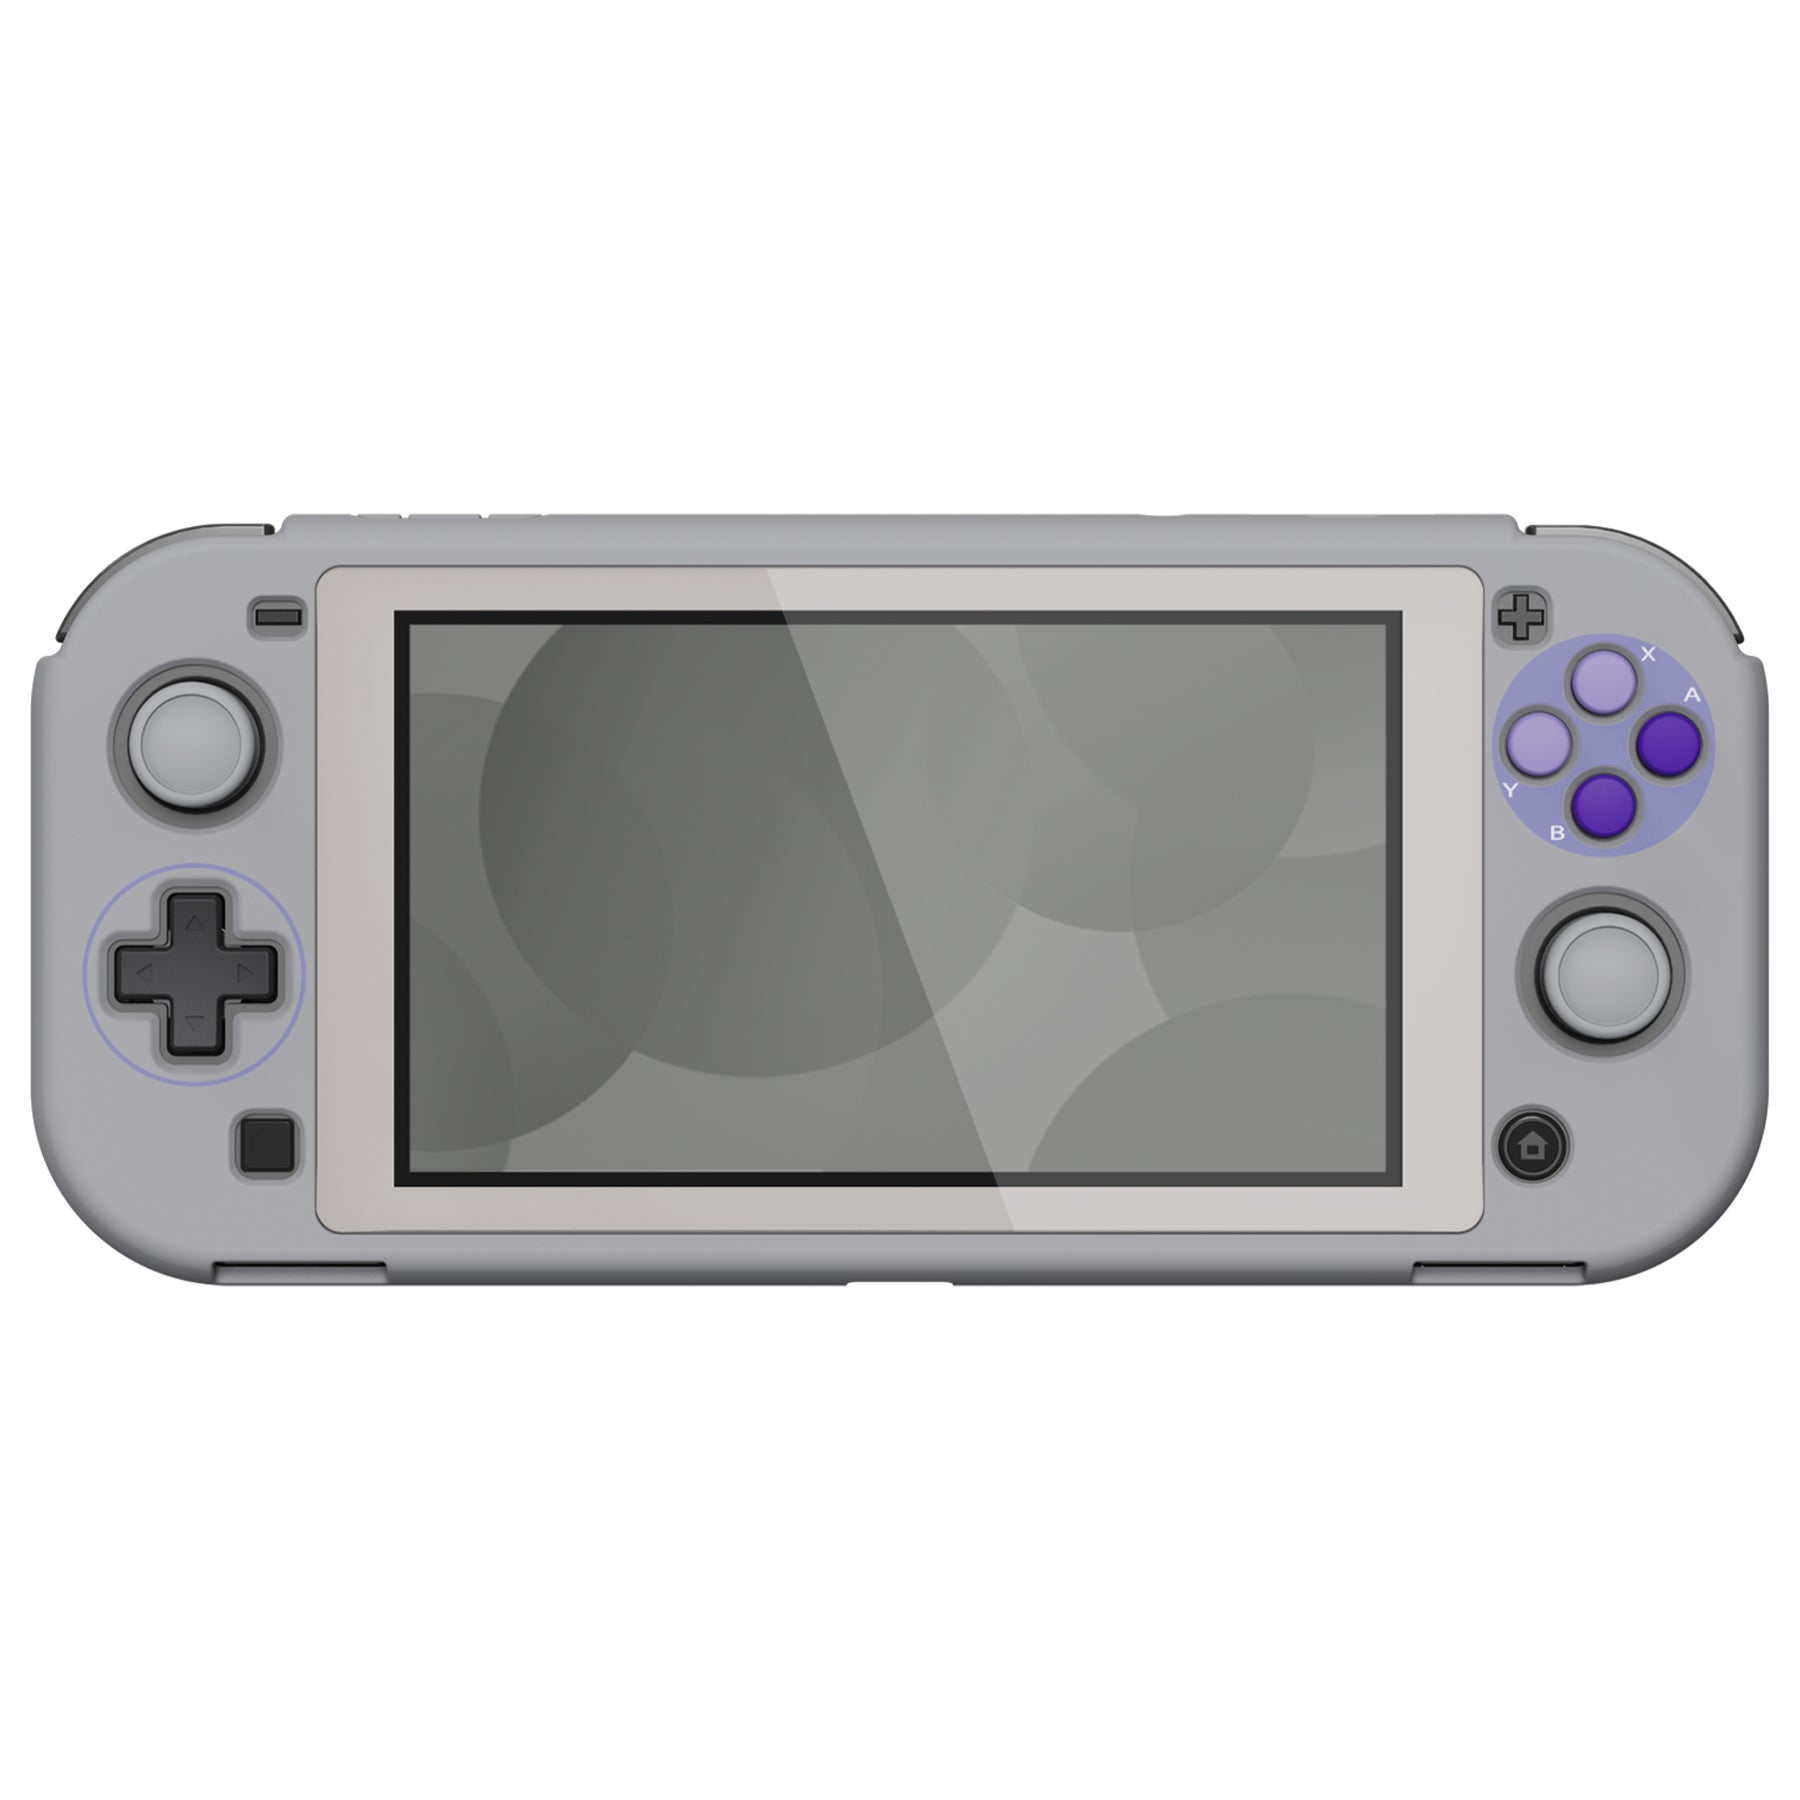 PlayVital ZealProtect Protective Case for Nintendo Switch Lite, Hard Shell Ergonomic Grip Cover for Switch Lite w/Screen Protector & Thumb Grip Caps & Button Caps - Classics SNES Style - PSLYY7002 PlayVital